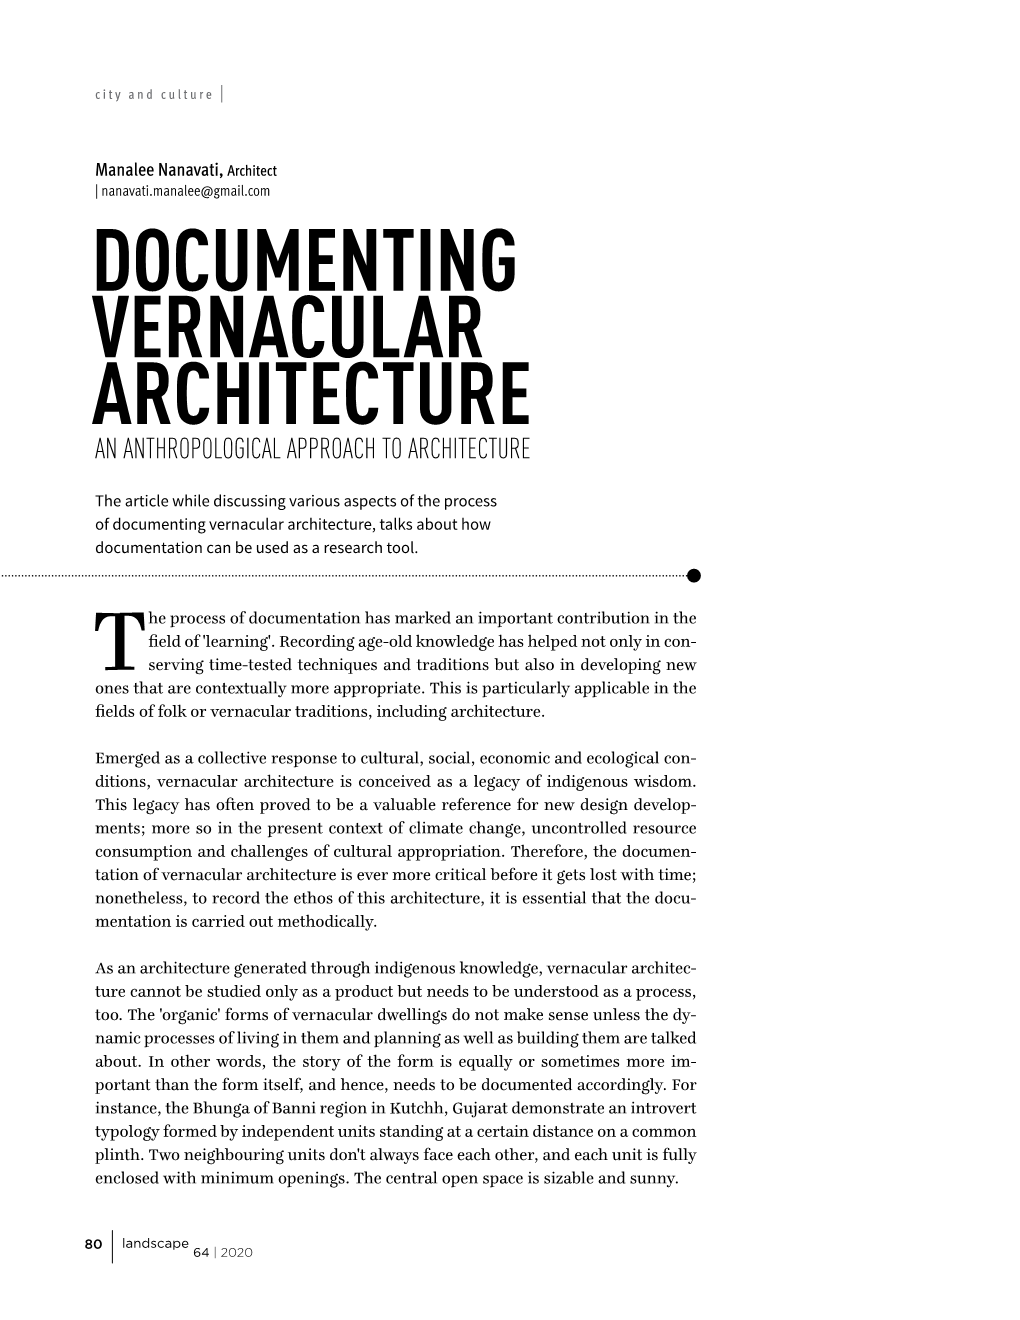 Documenting Vernacular Architecture an Anthropological Approach to Architecture